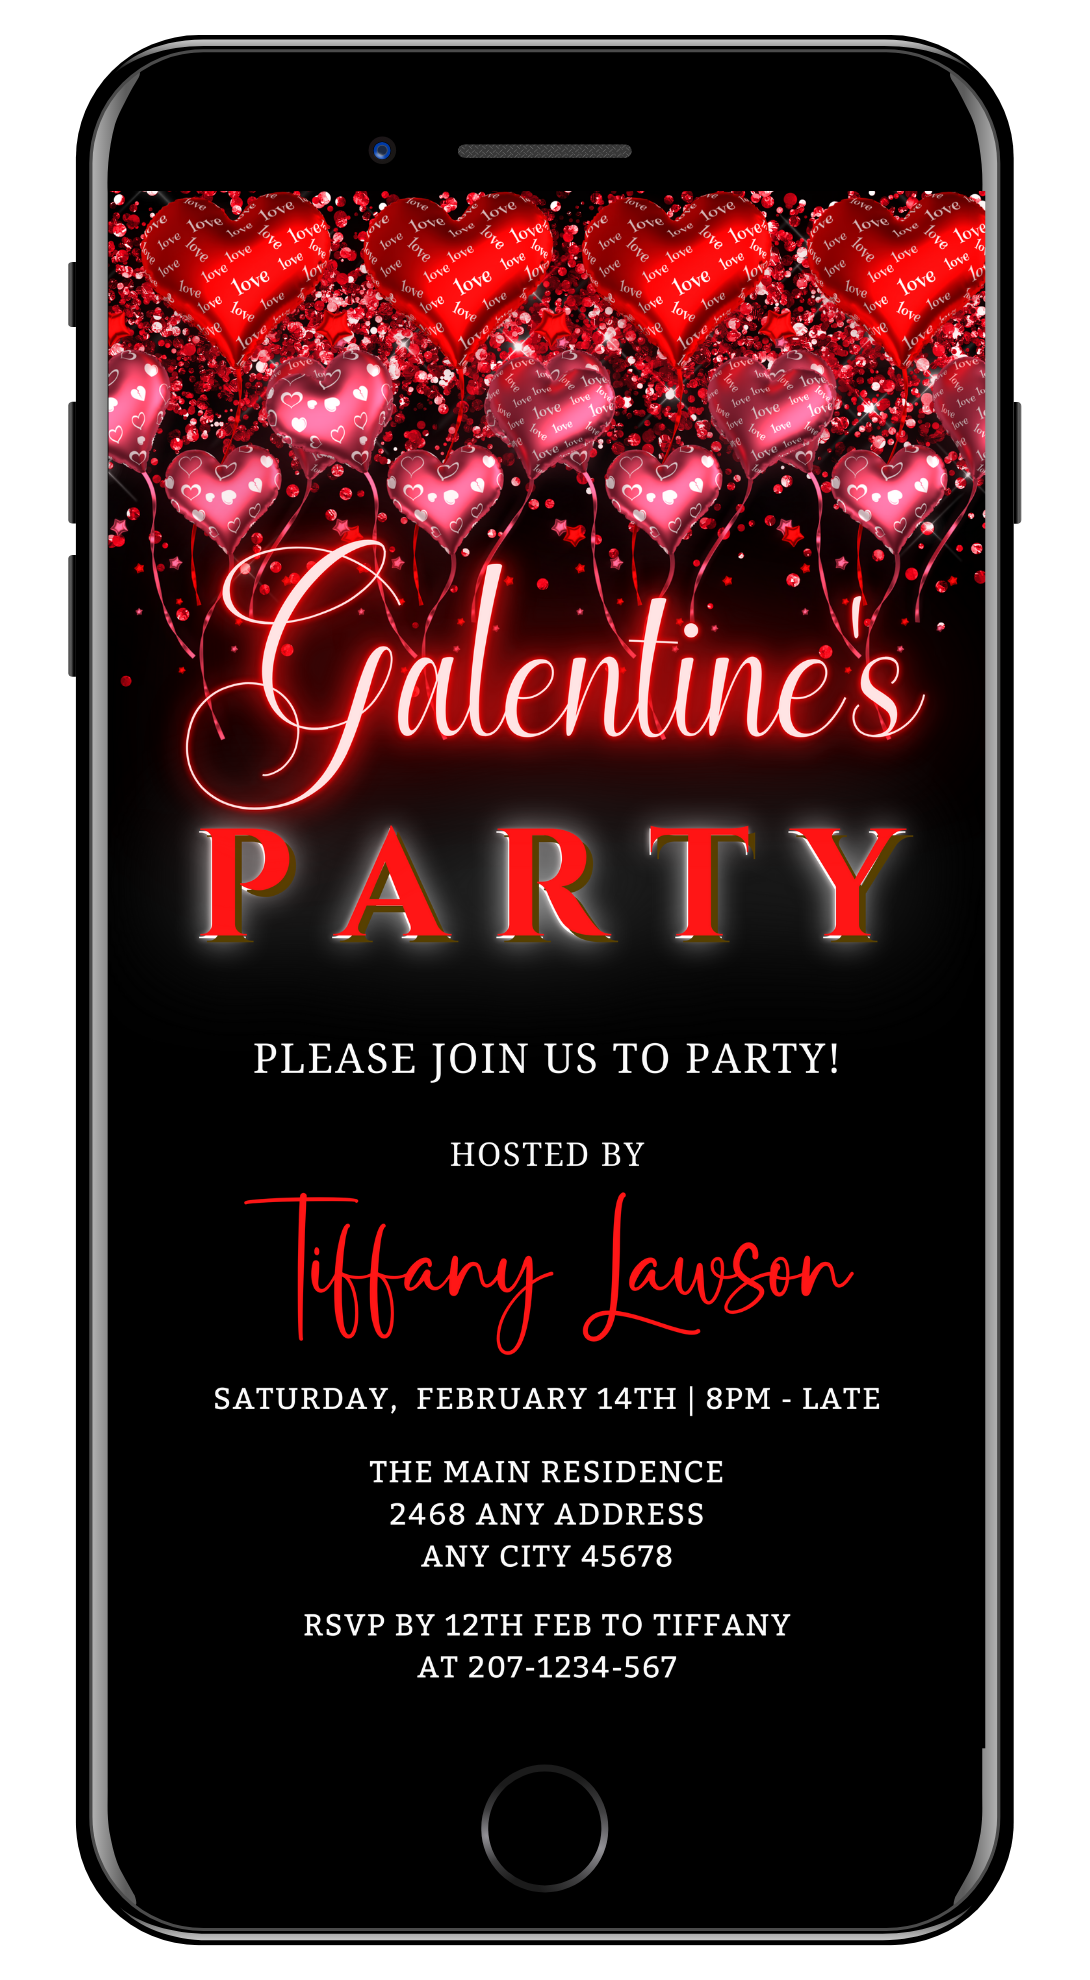 Floating Red Heart Balloons Galentines Party Evite displayed on a smartphone screen, featuring editable text and graphics for customizable digital invitations.